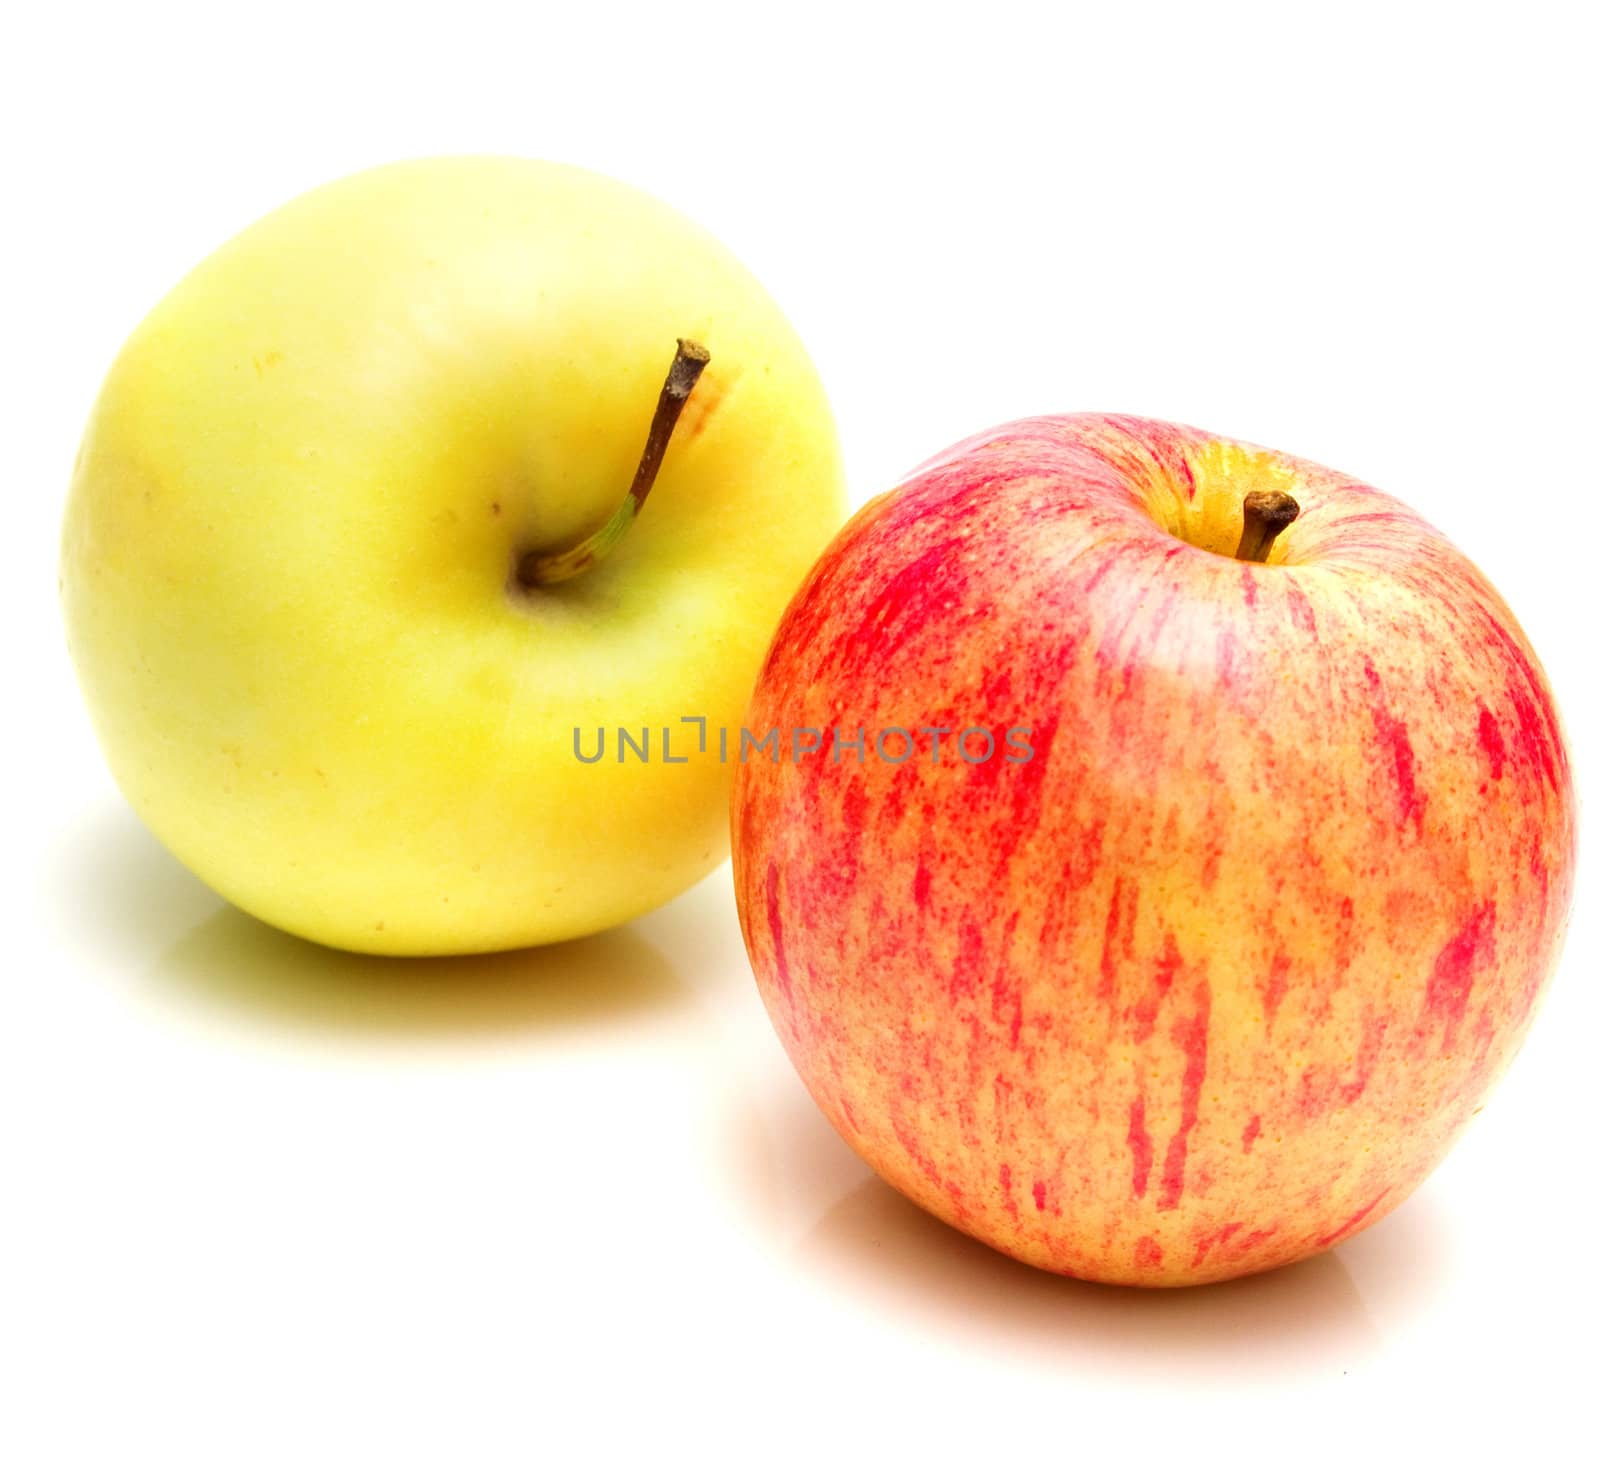 Red and yellow apples on the white background. Isolated.